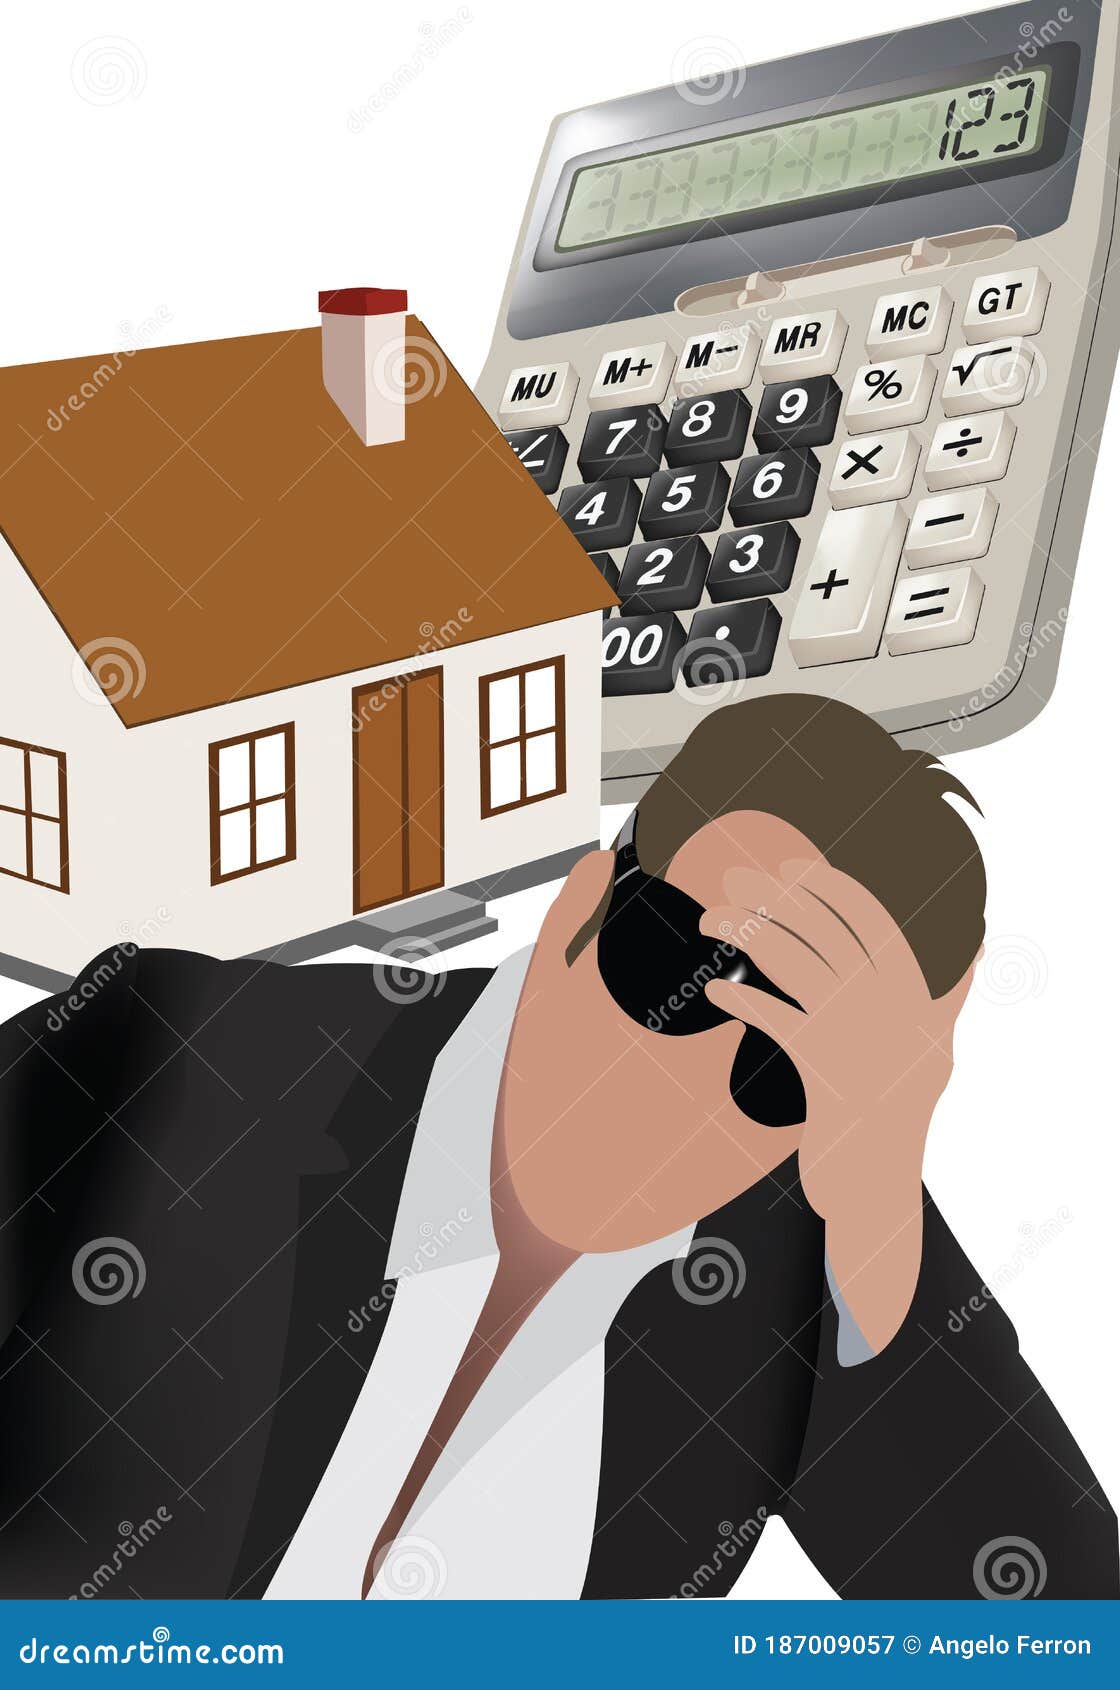 desperate man with hand on forehead to buy house